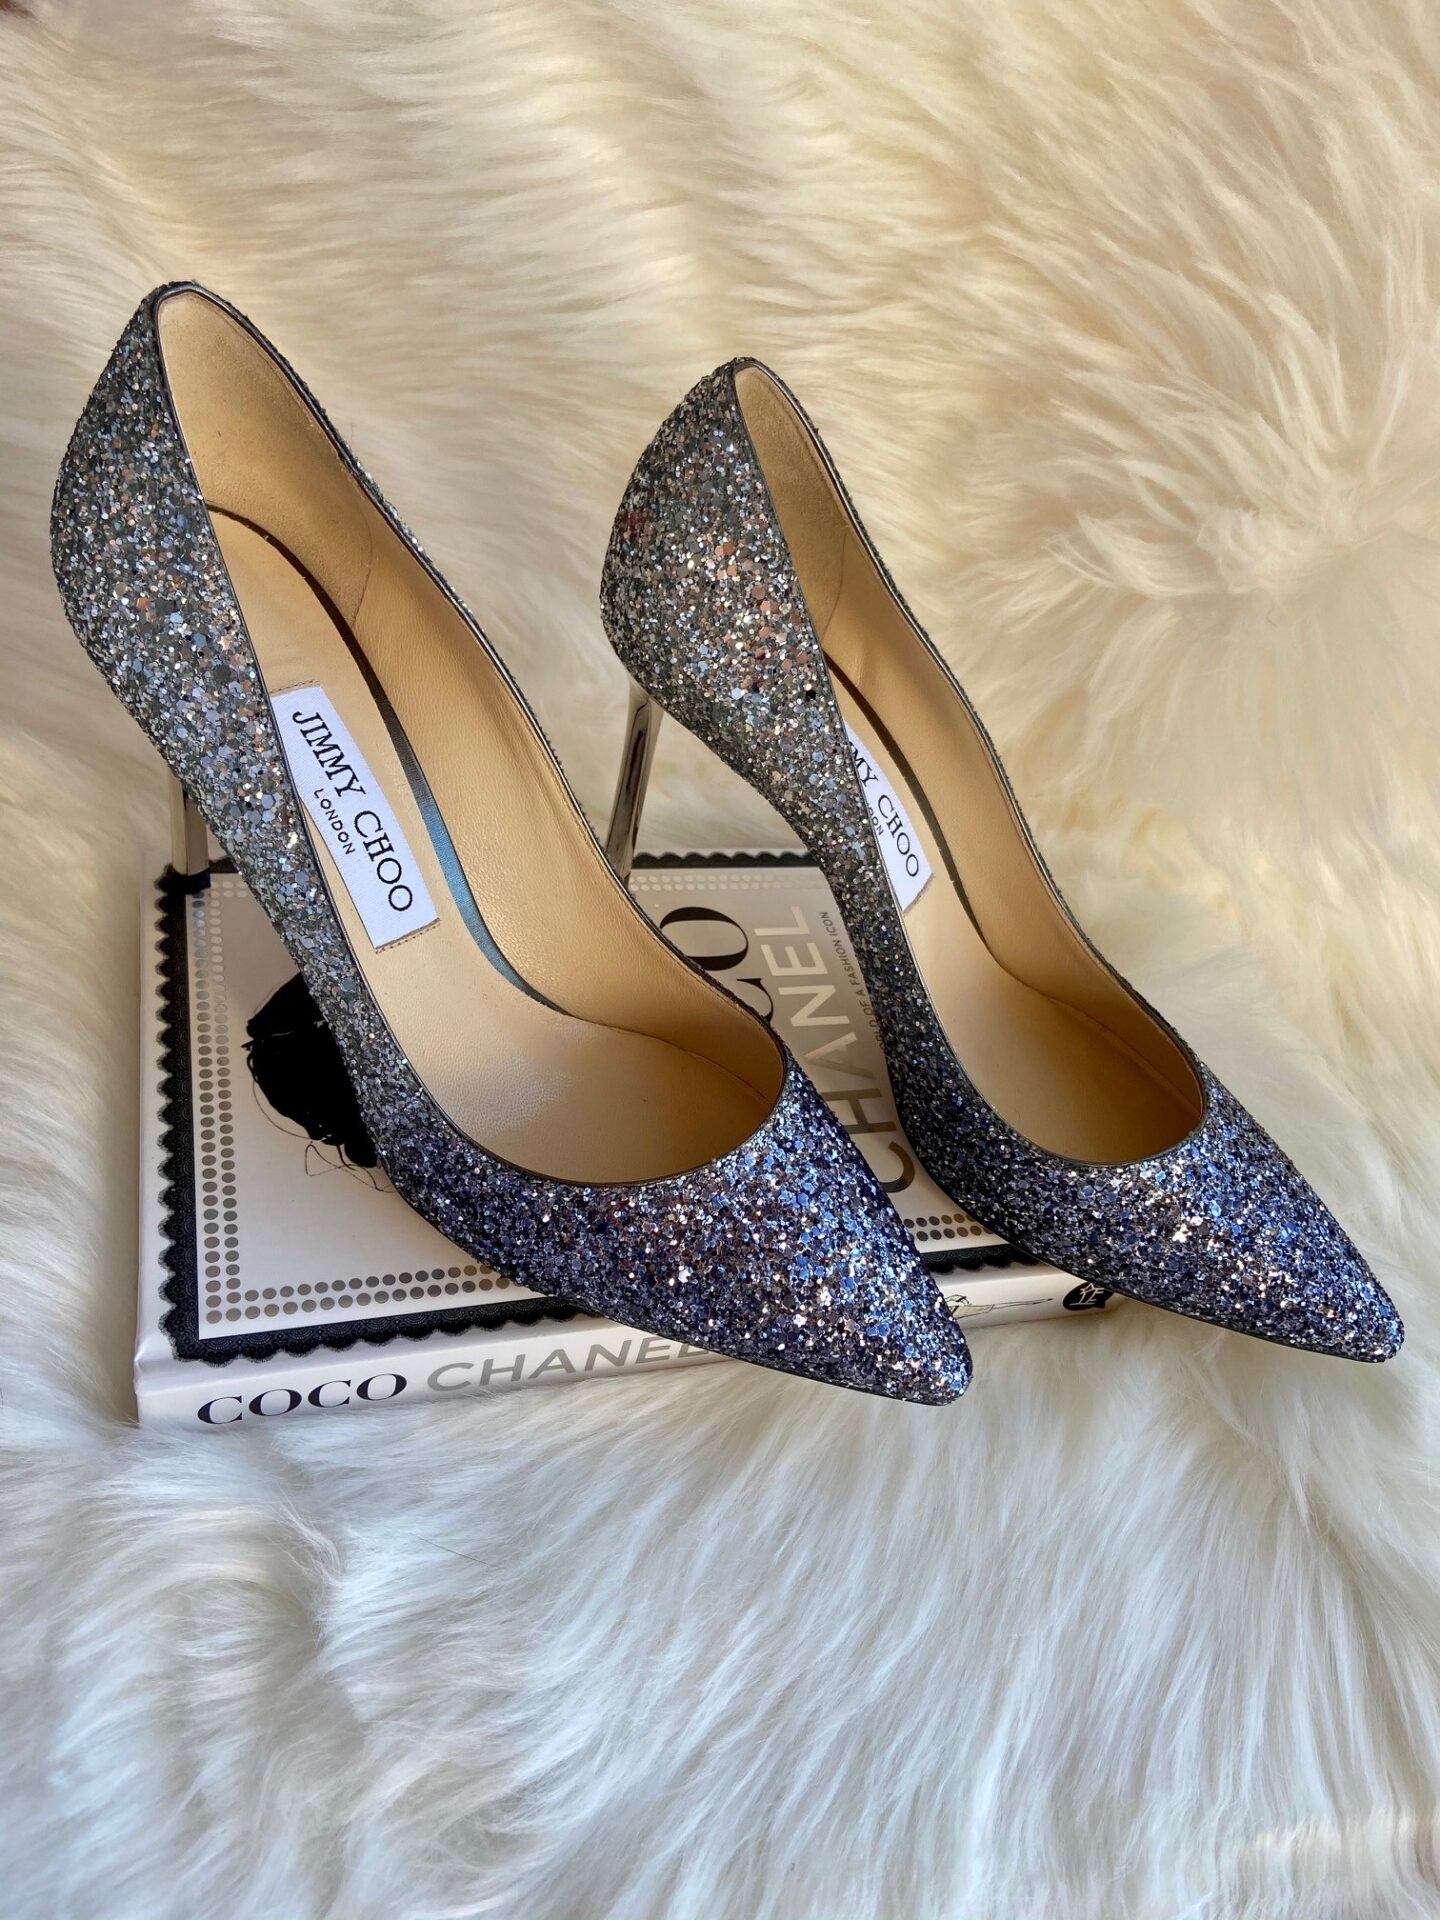 jimmy choo best purchases of 2020